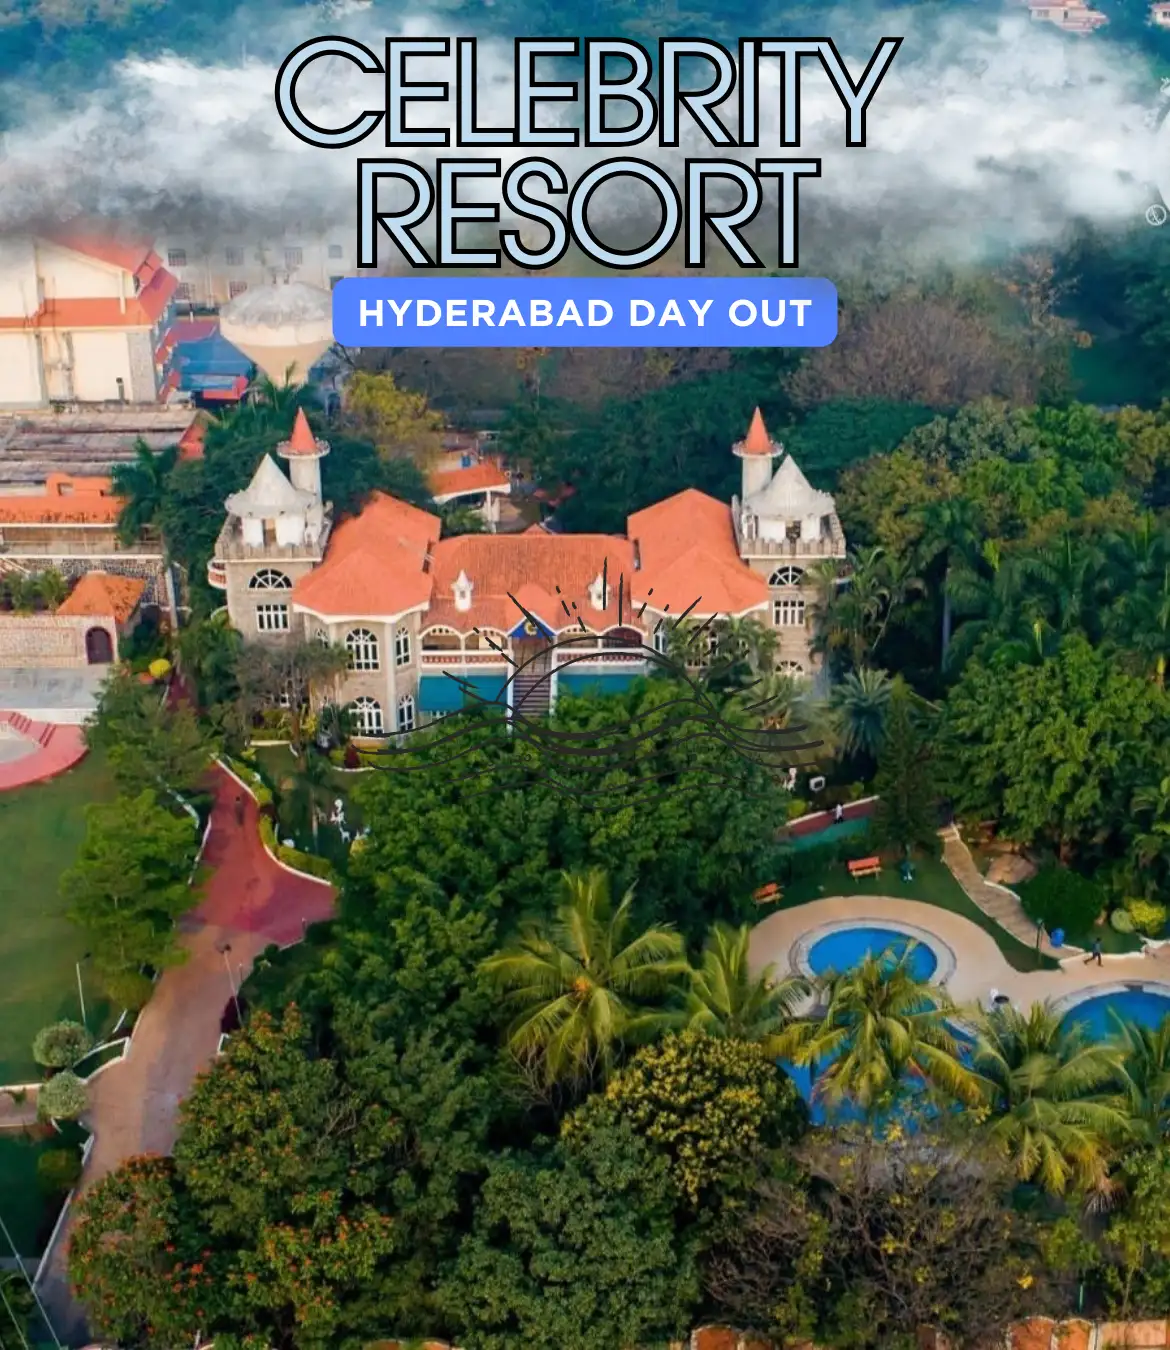 Celebrity Resort Hyderabad Day Out